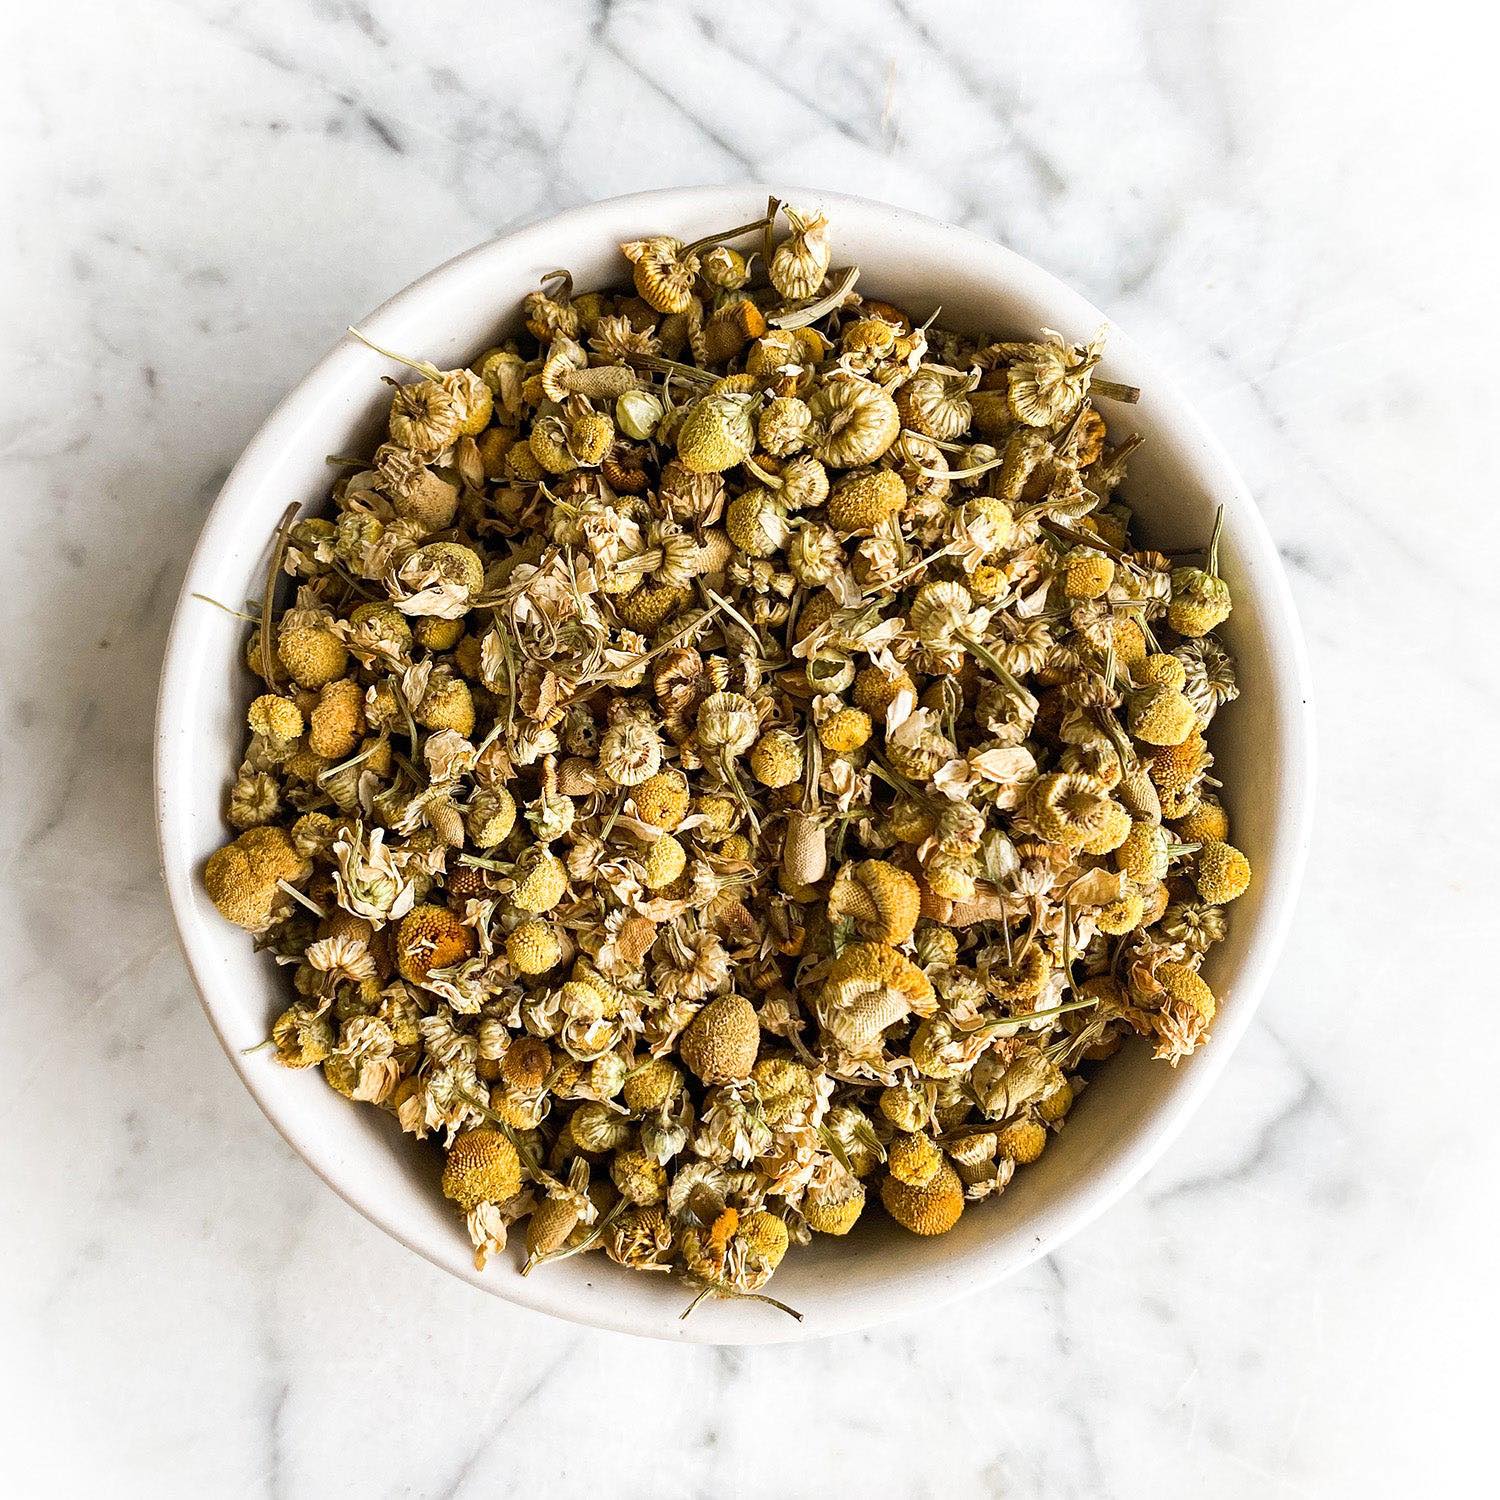 Dried chamomile in a white bowl on a white marble background